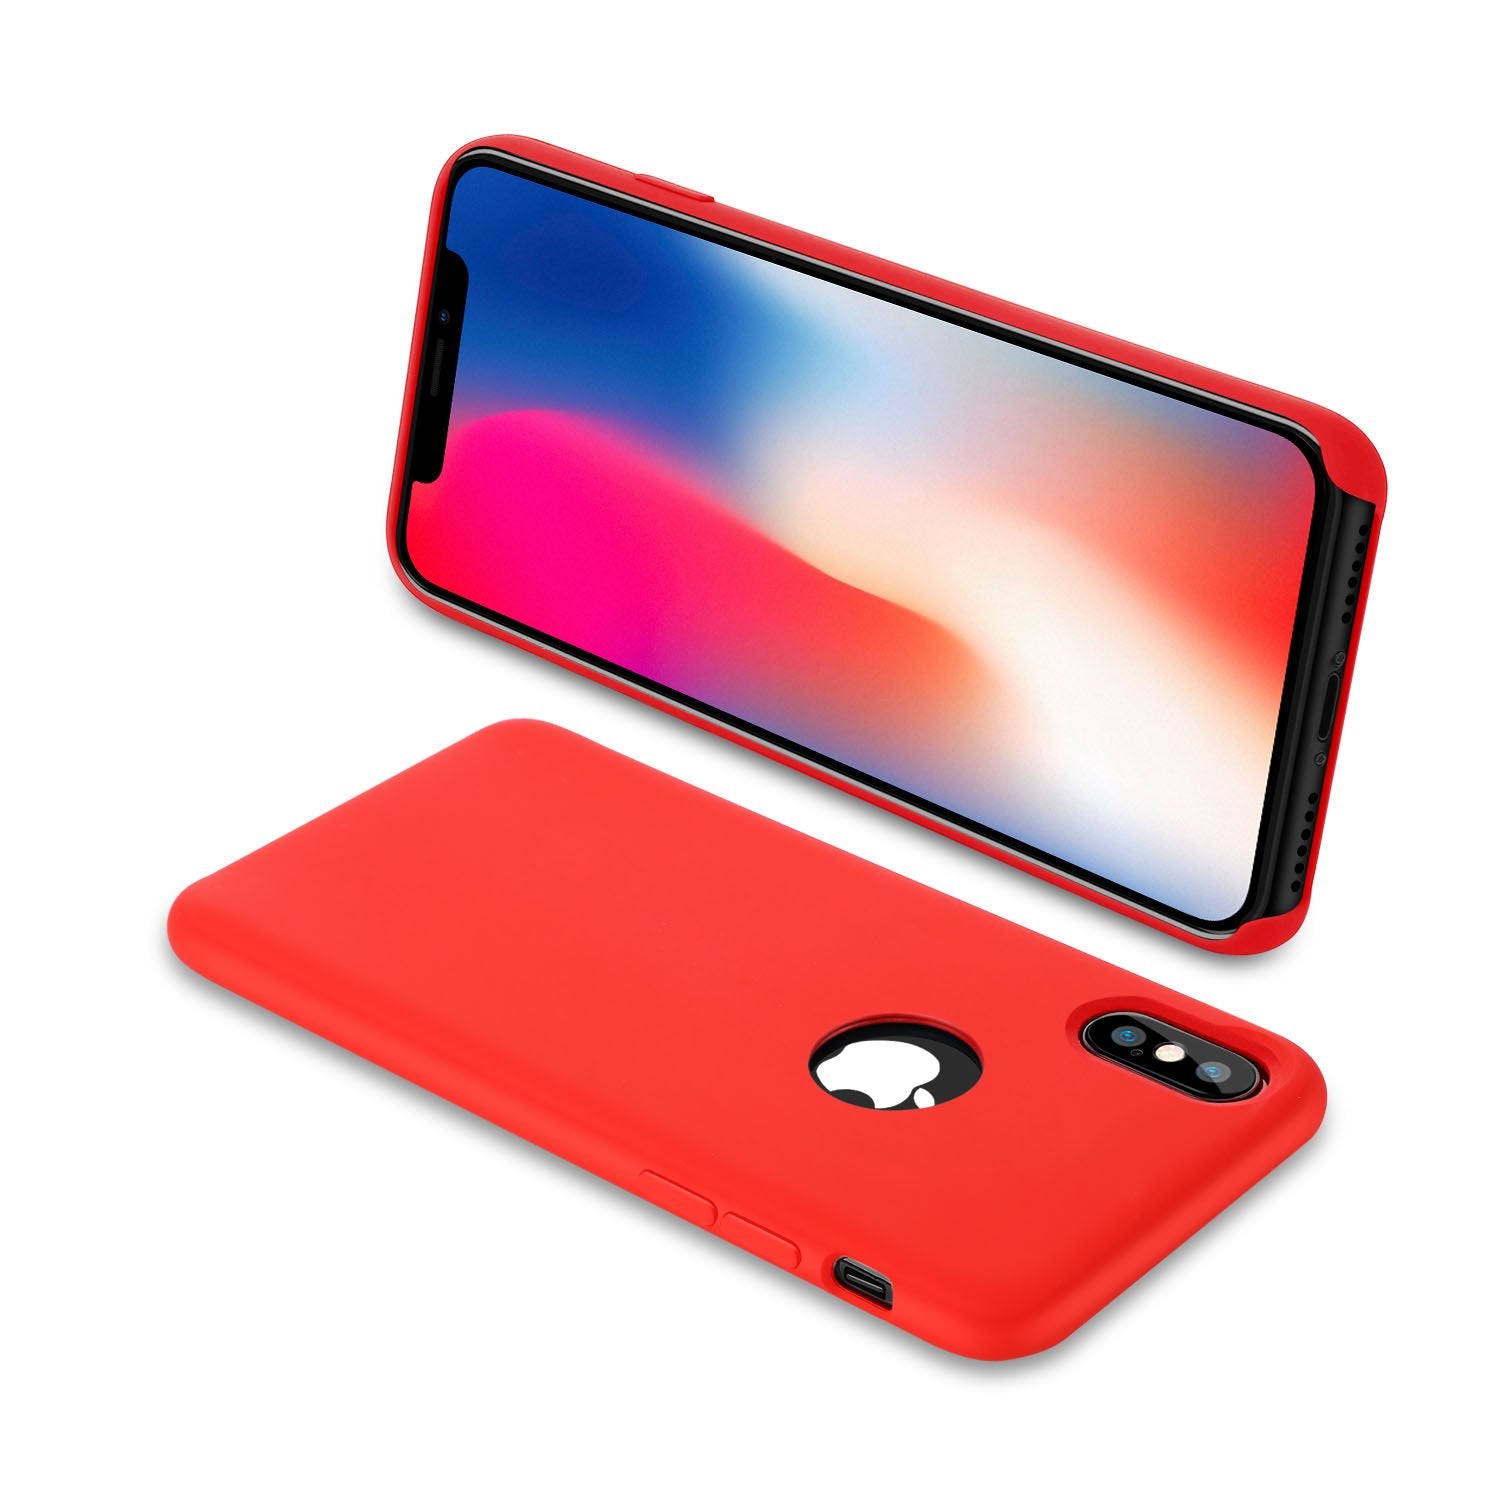 iPhone X Case Liquid Silicone Gel Rubber Case with Soft Microfiber Cloth Lining Cushion for Apple iPhone X (red)